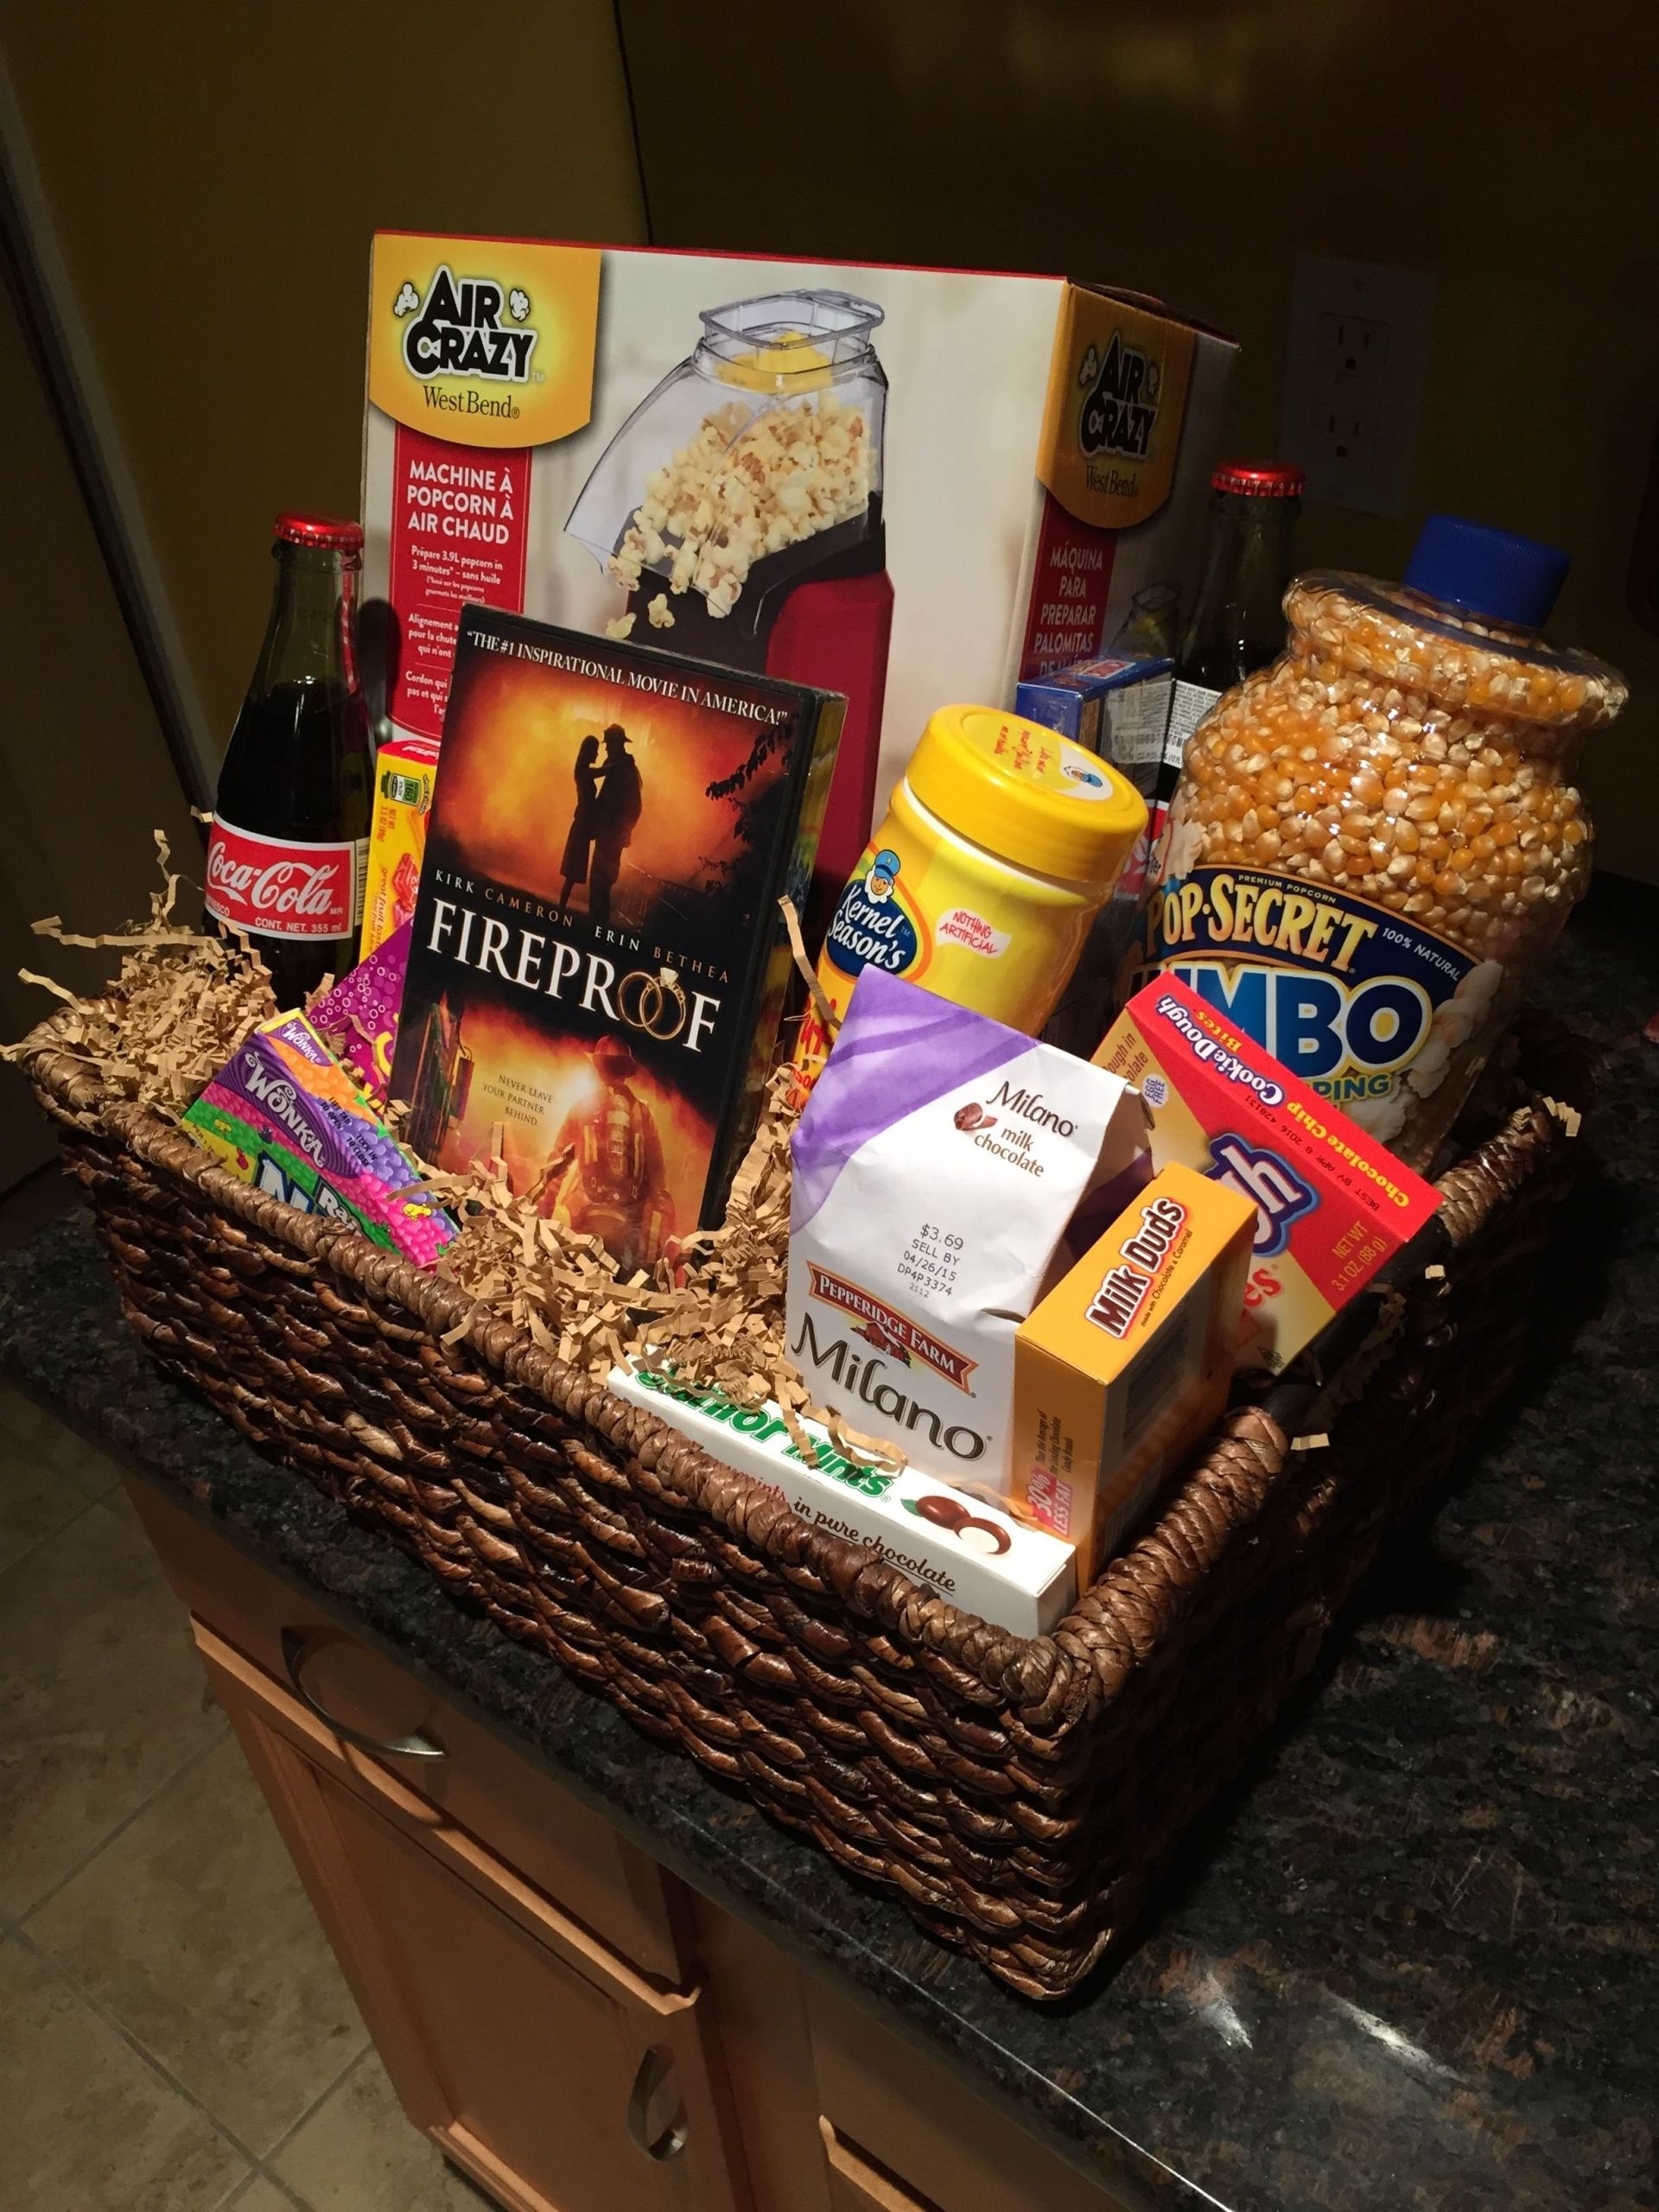 Ideas For Gift Baskets To Auction
 10 Best Ideas For Gift Baskets For Fundraisers 2019